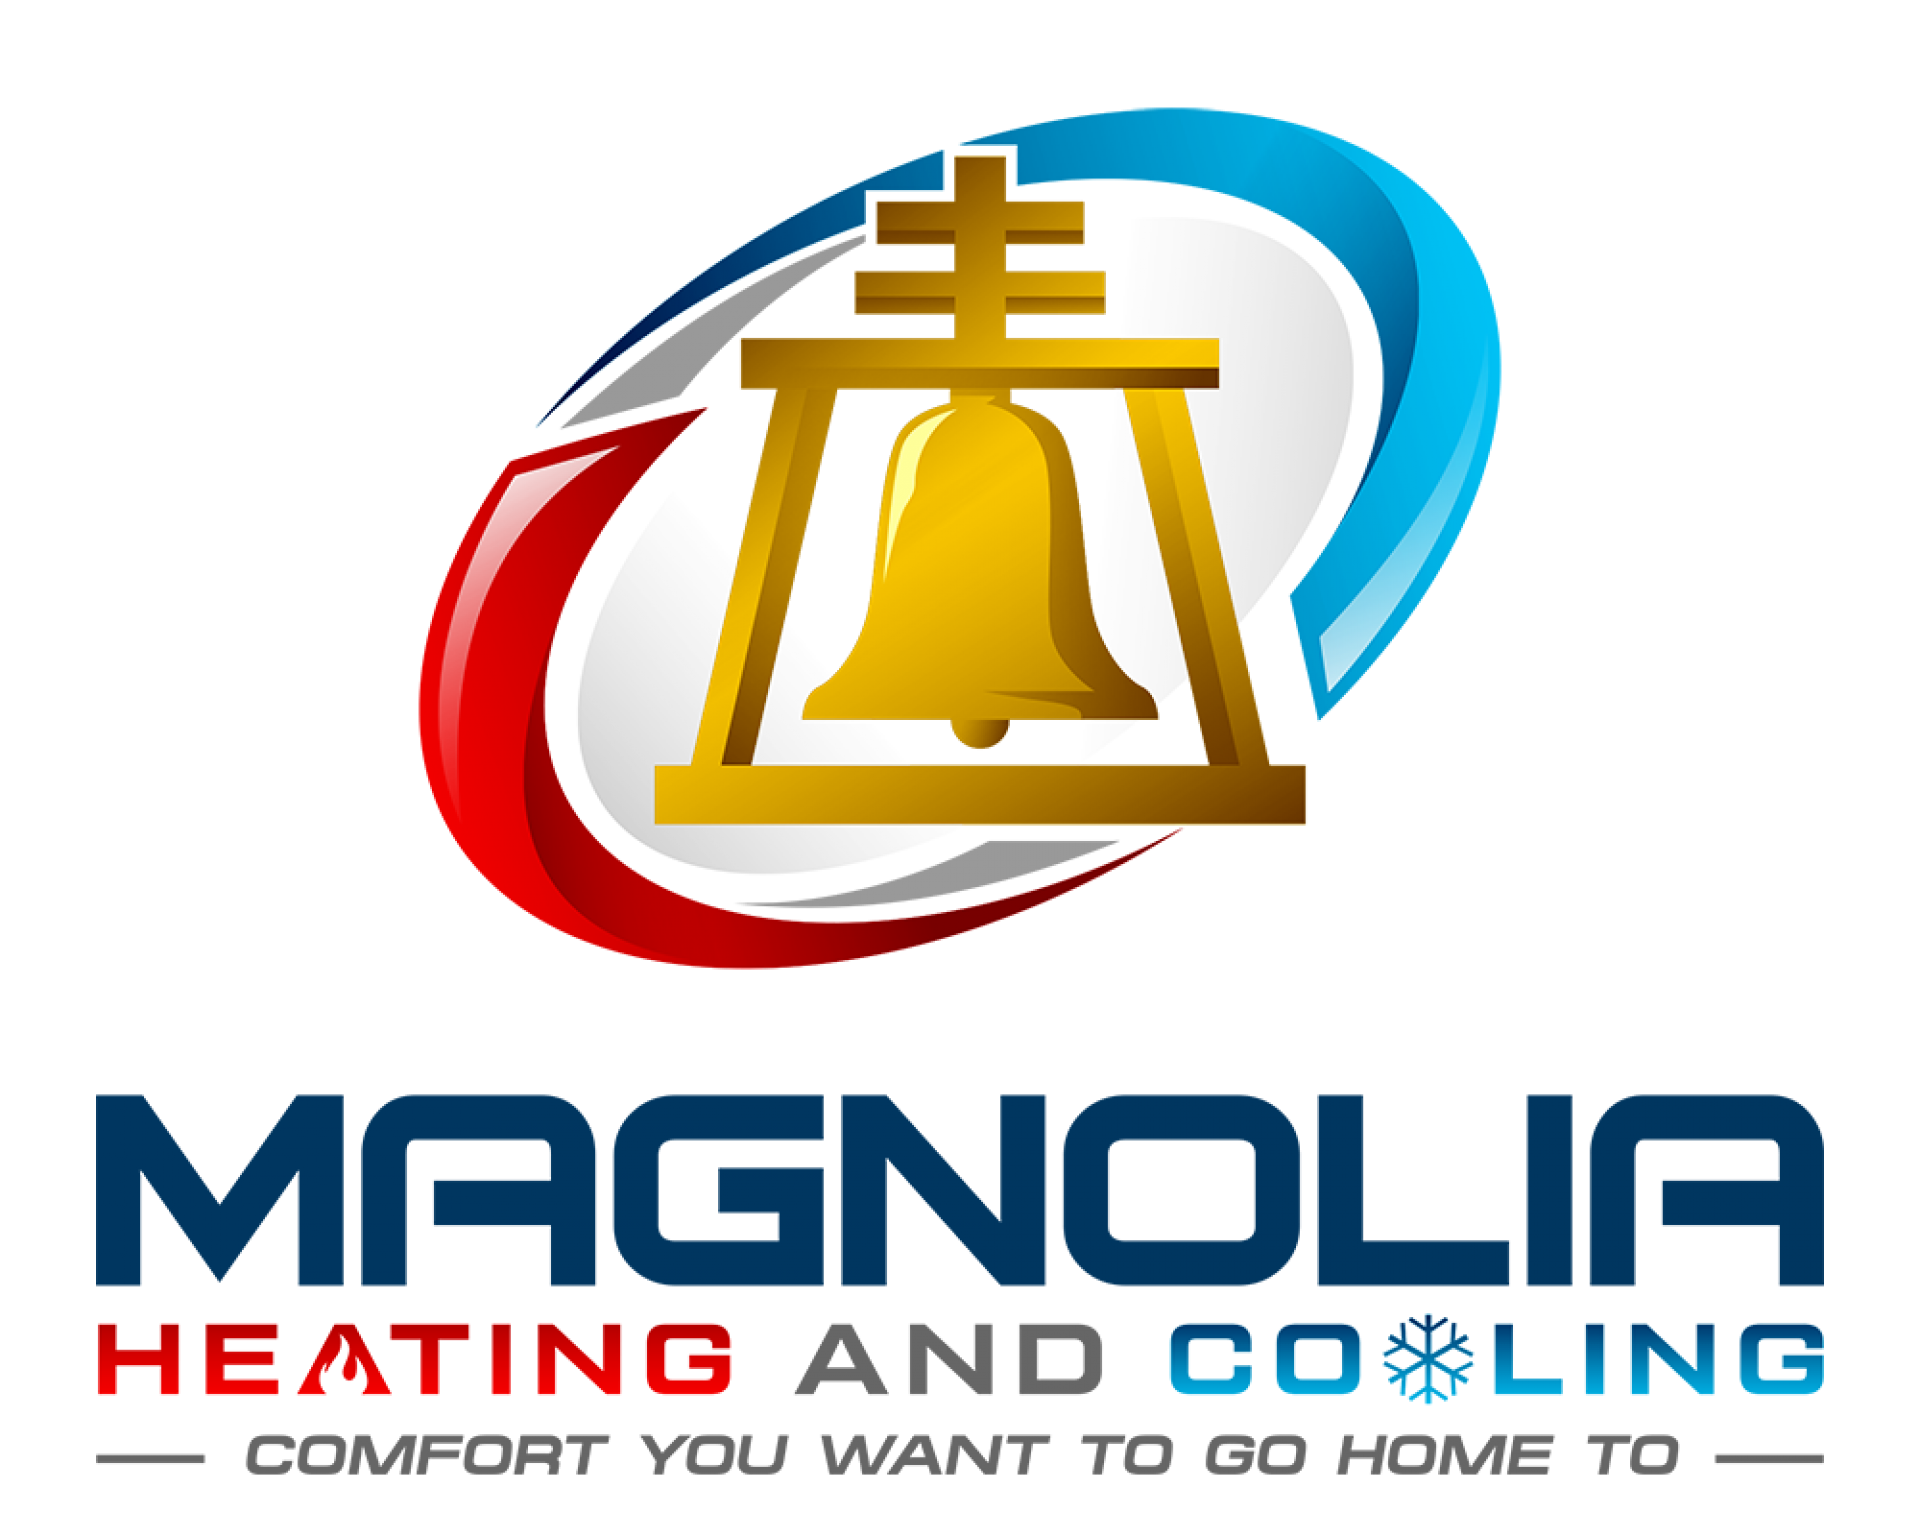 Magnolia Heating and Cooling